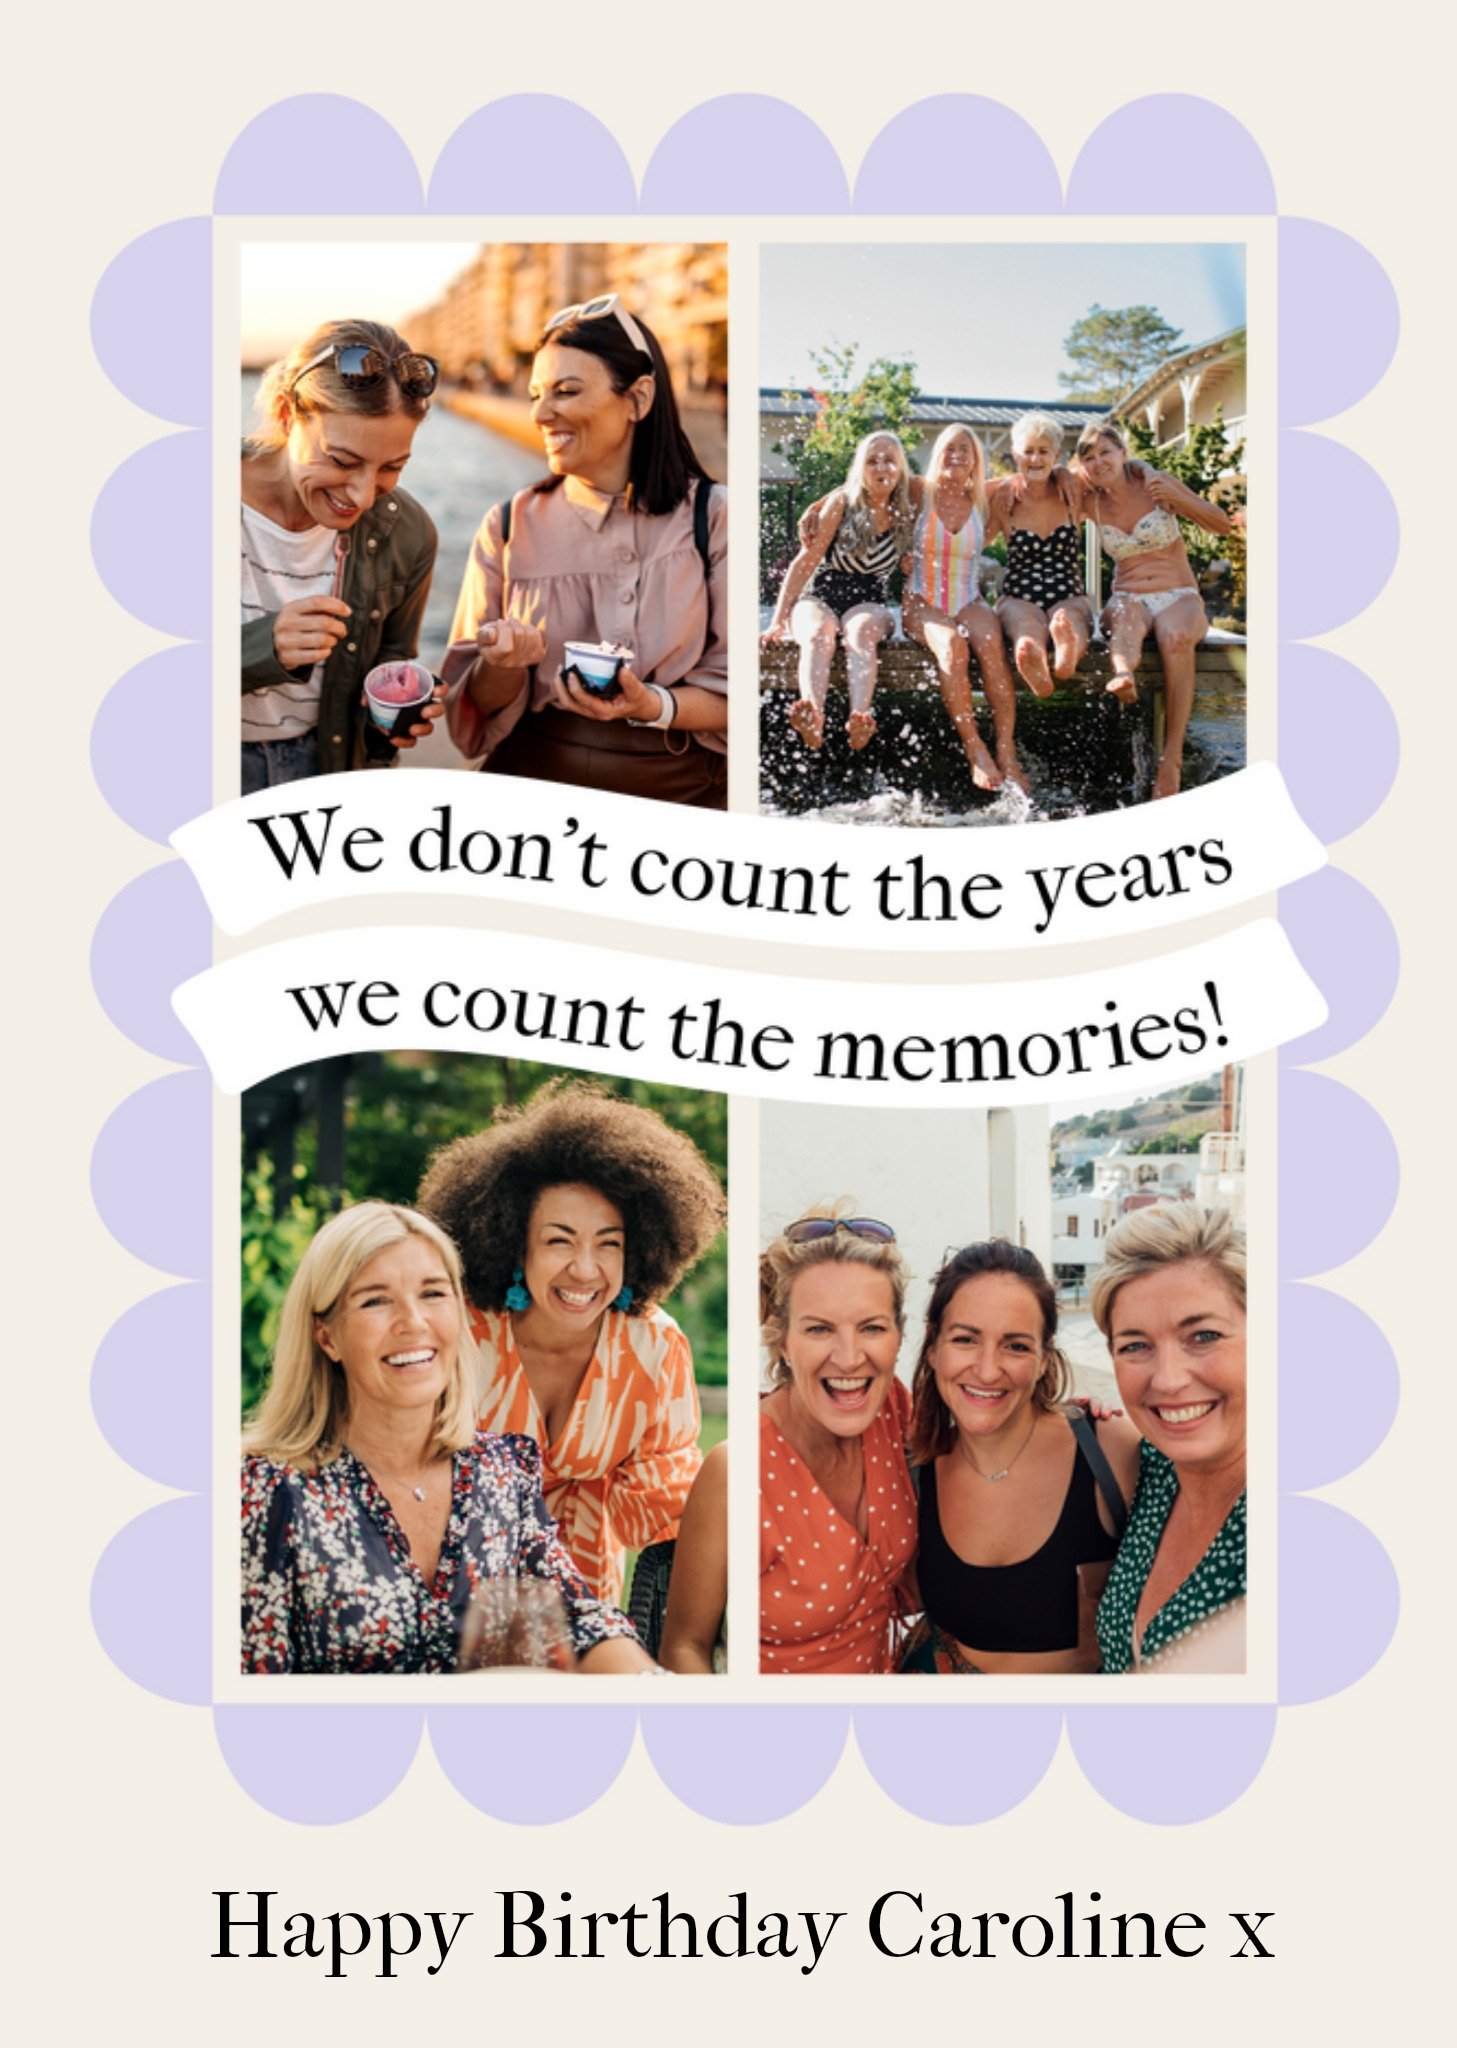 Moonpig Count The Memories Multiple Photo Upload Birthday Card, Large